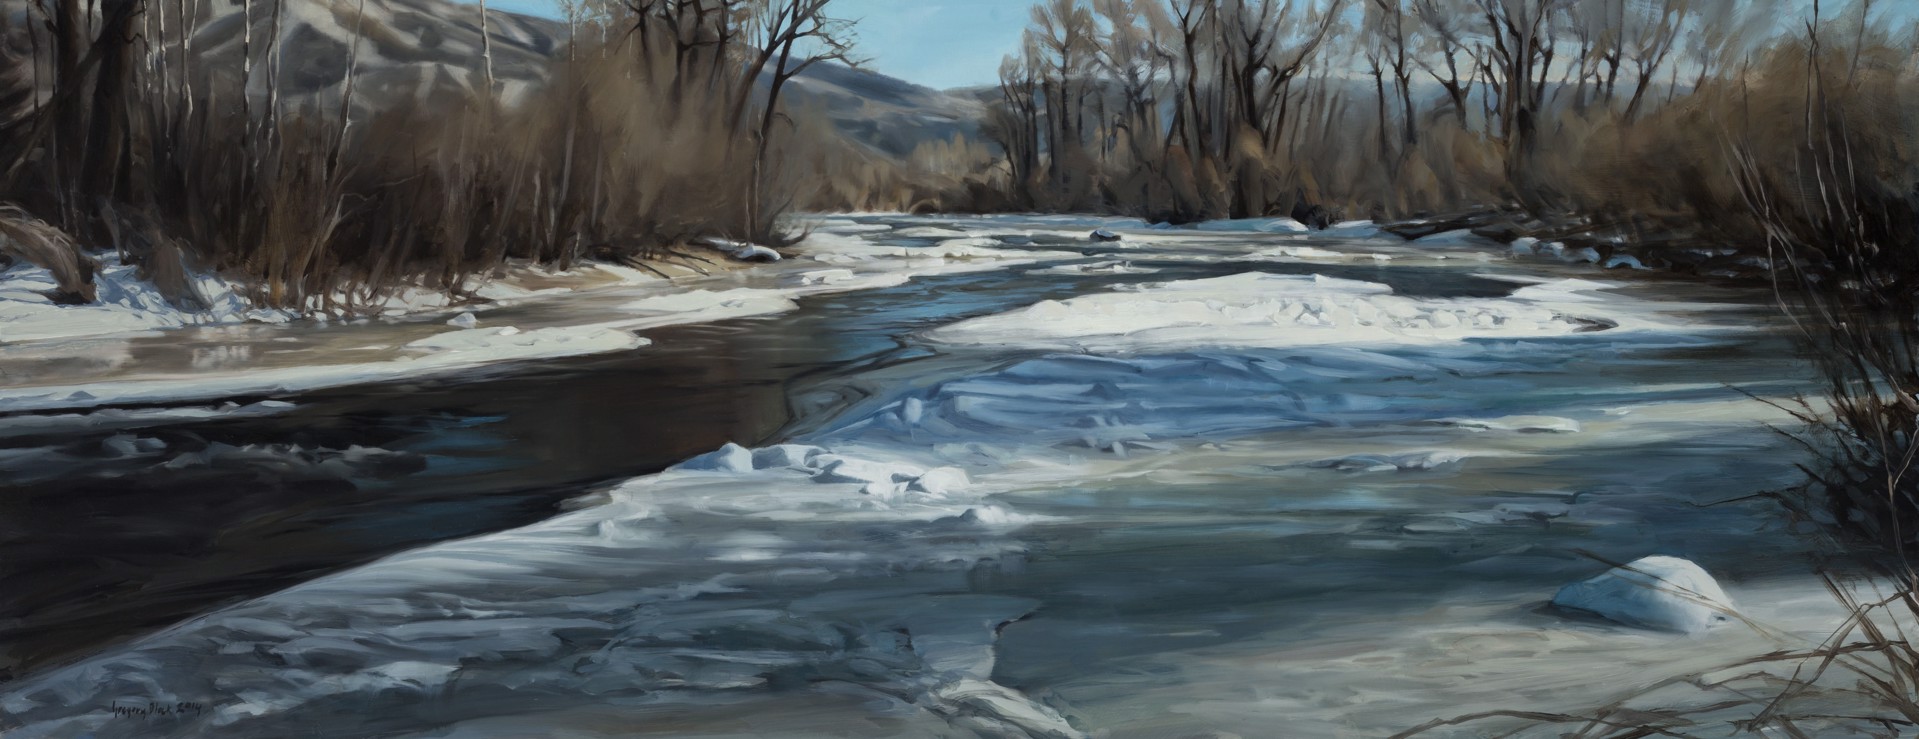 Yampa River Early Spring by Gregory Block